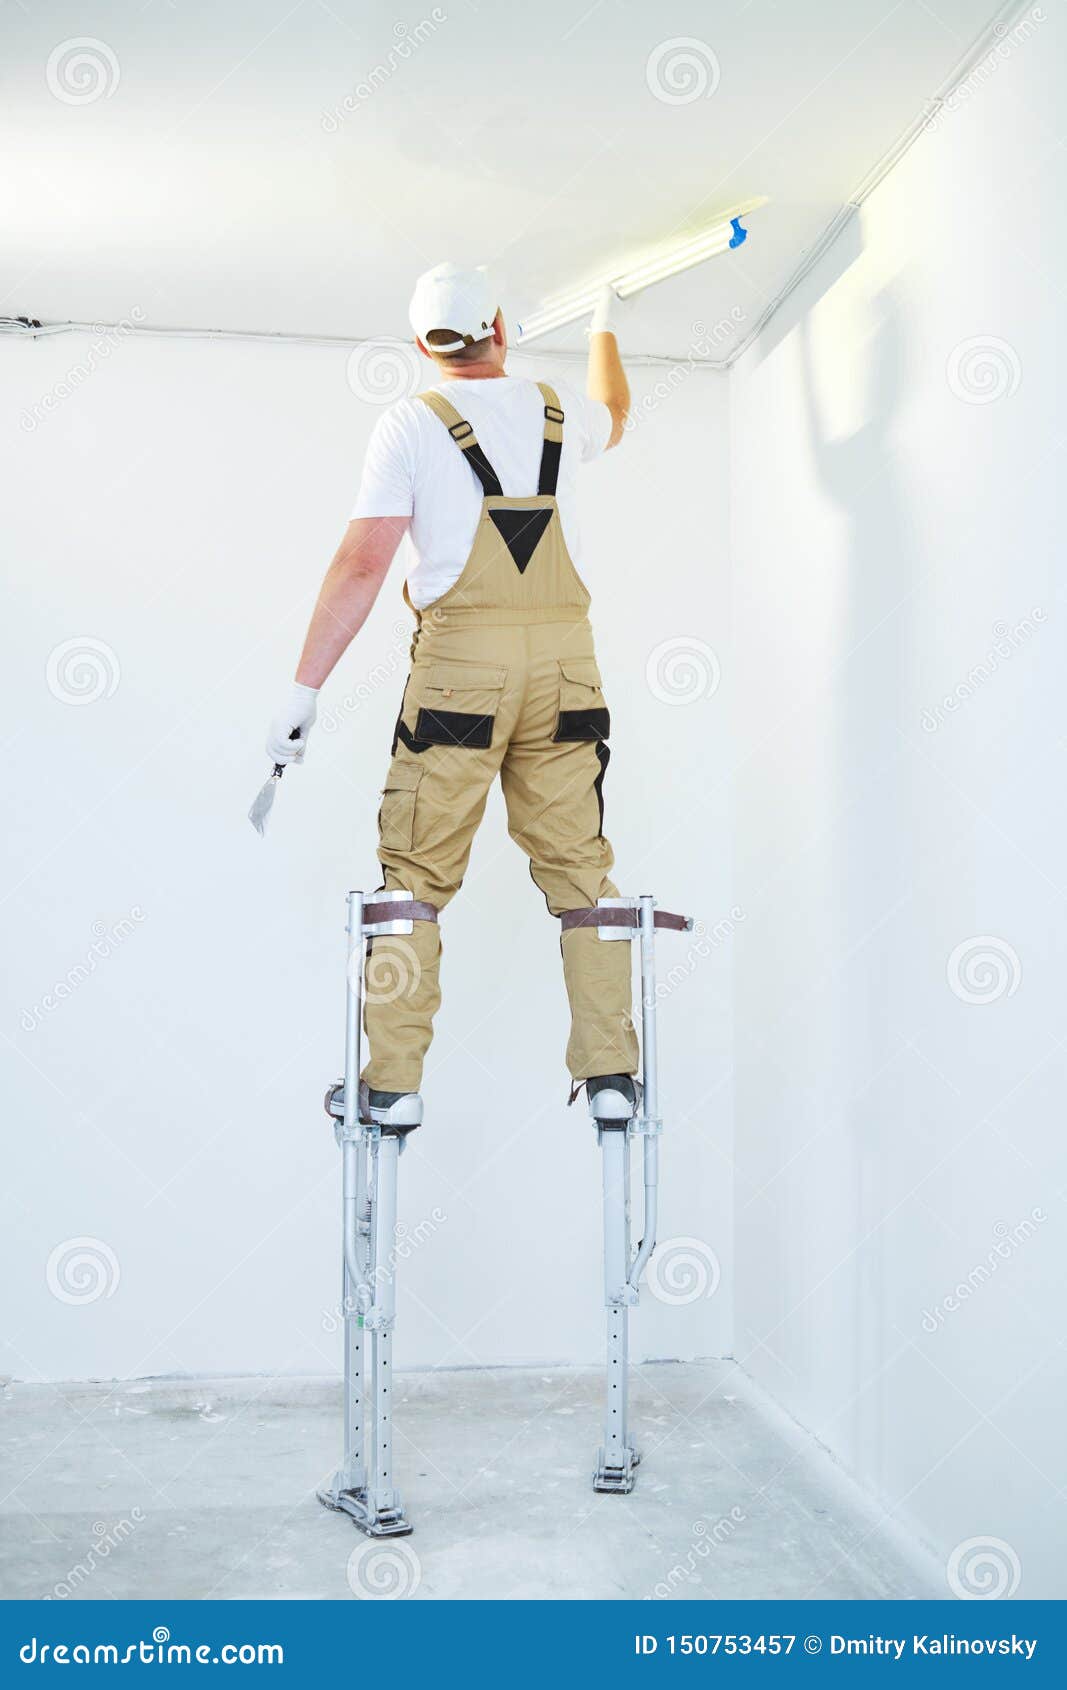 Painter In Stilts With Putty Knife Plasterer Smoothing Ceiling